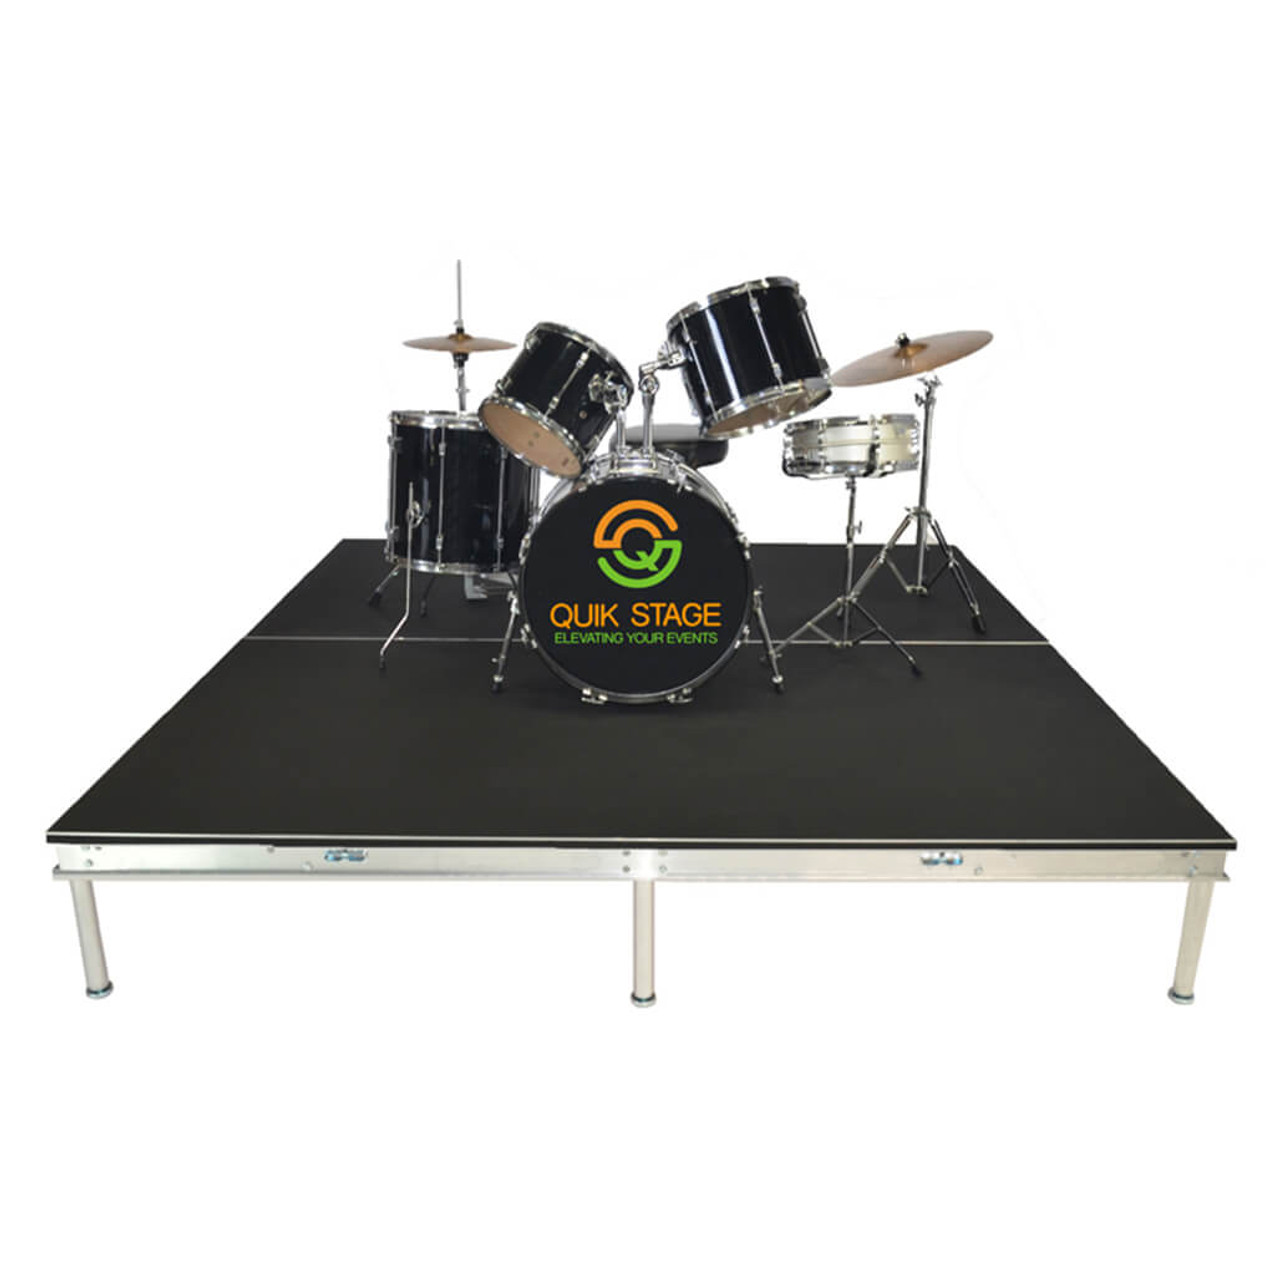 Quik Stage 8' x 12' High Portable Stage Package with Black Polyvinyl Non-Skid Surface. Additional Heights and Surfaces Available - Drum Riser without skirting